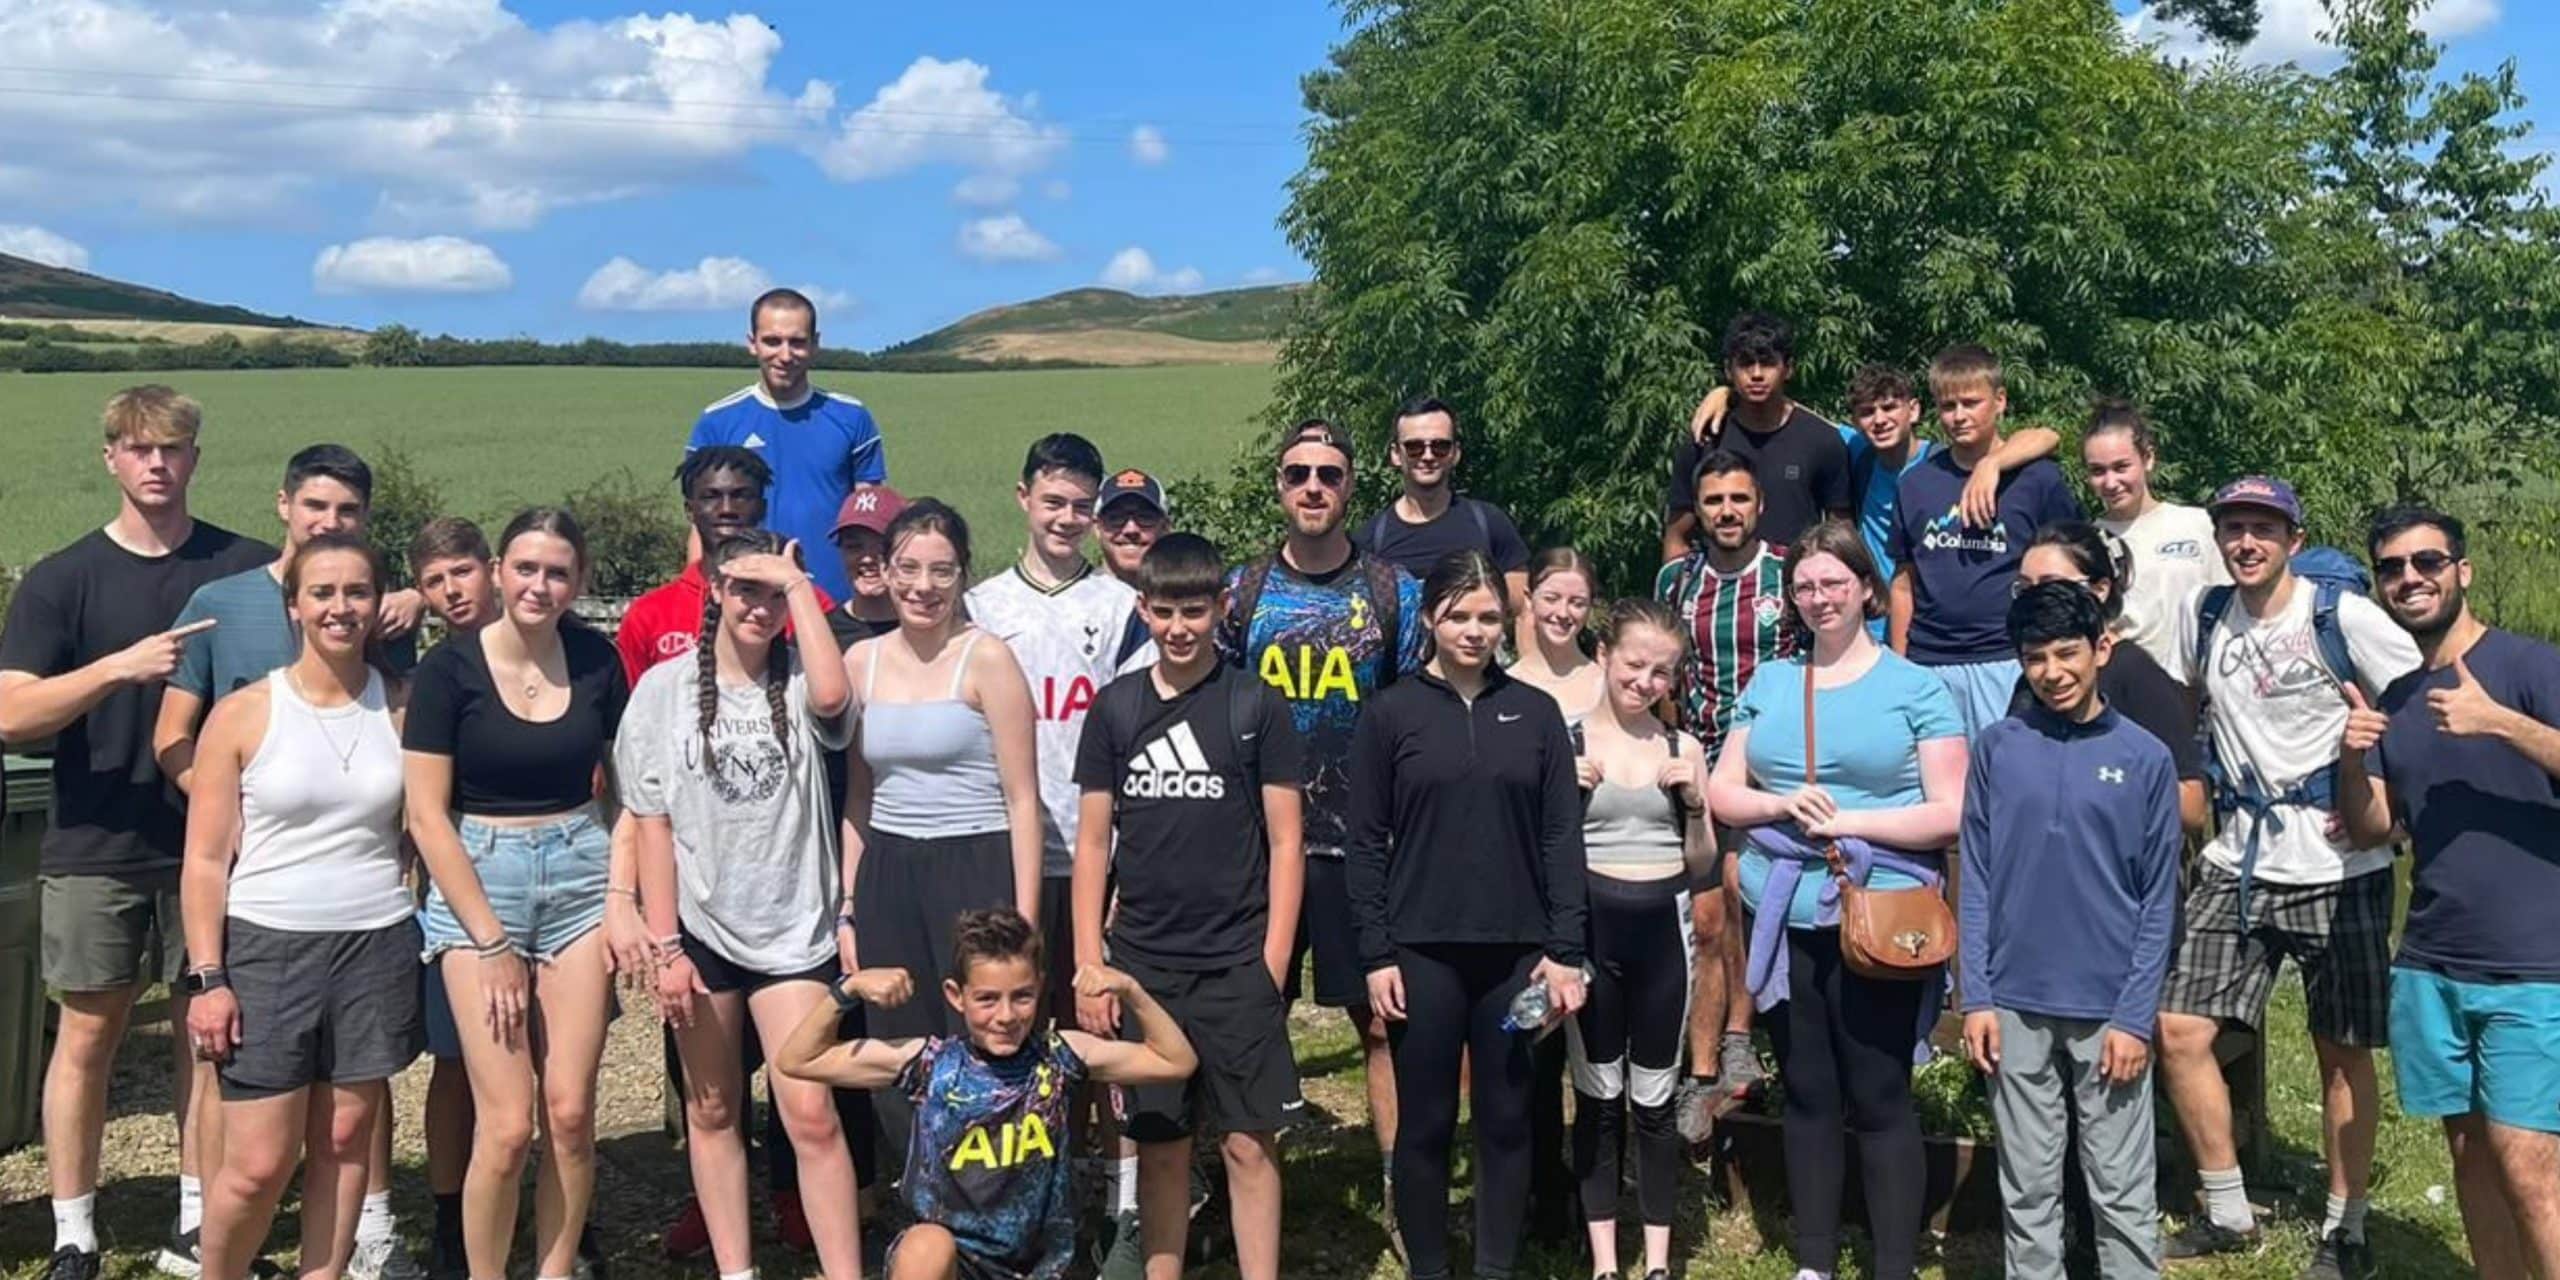 A large group of TVCC youth and leaders posing for a group photo on a walk in the countryside. It is a hot summer day